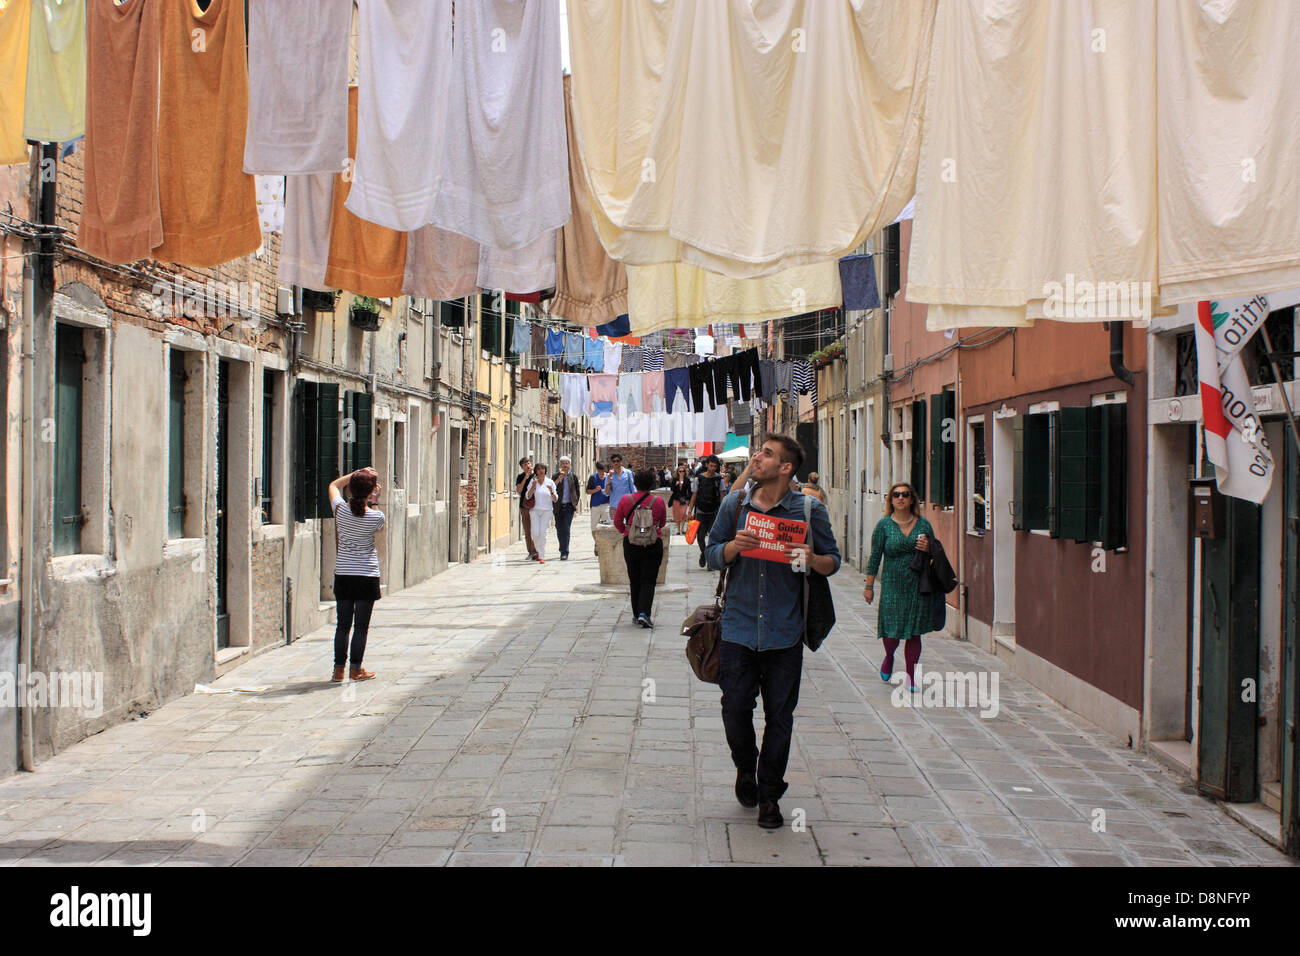 Venice, Italy. 1st June 2013. Opening day of the Venice Biennale. Stock Photo